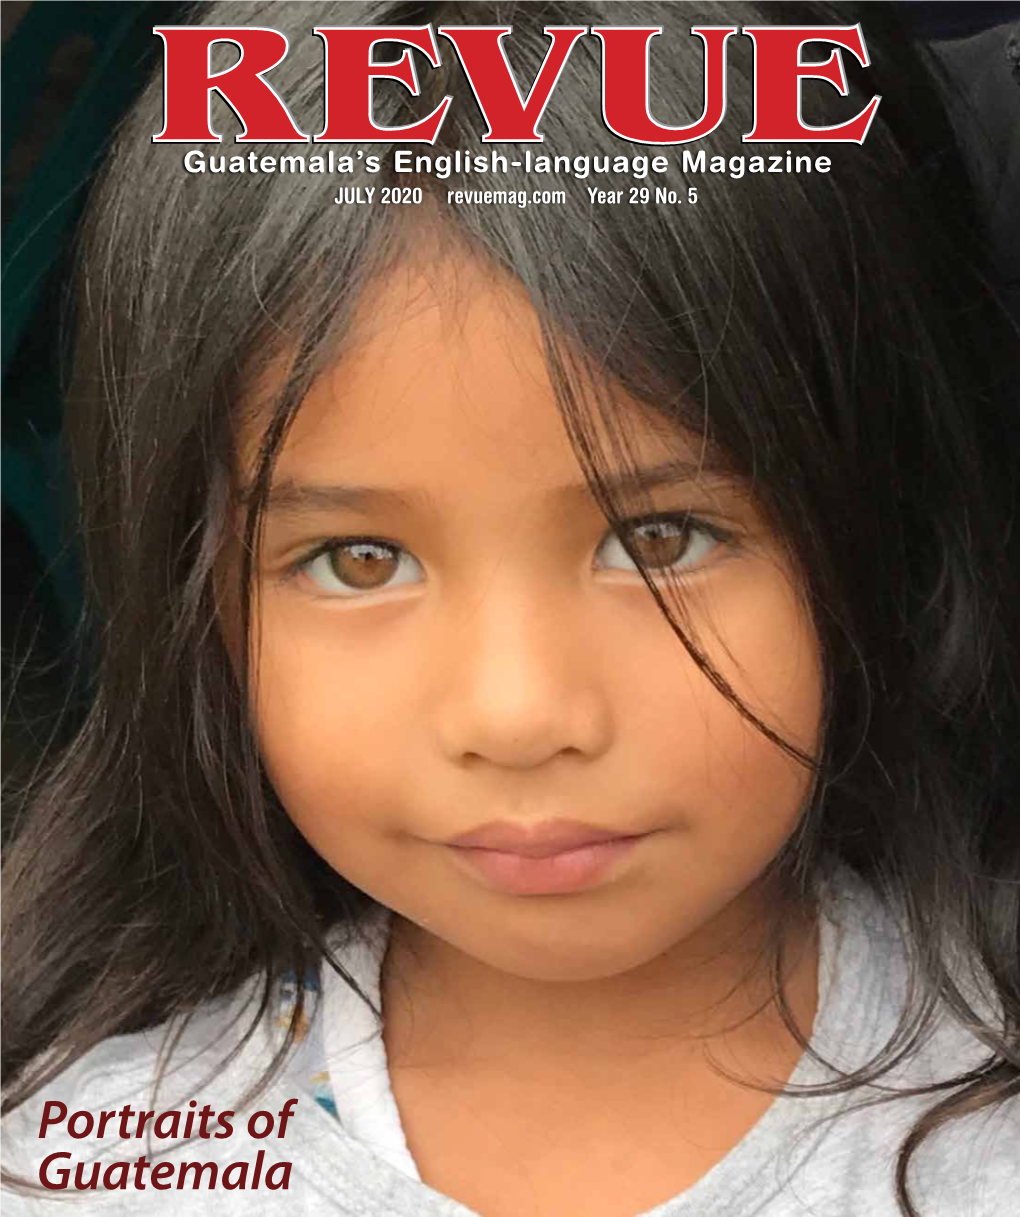 Portraits of Guatemala THIS MONTH in REVUE